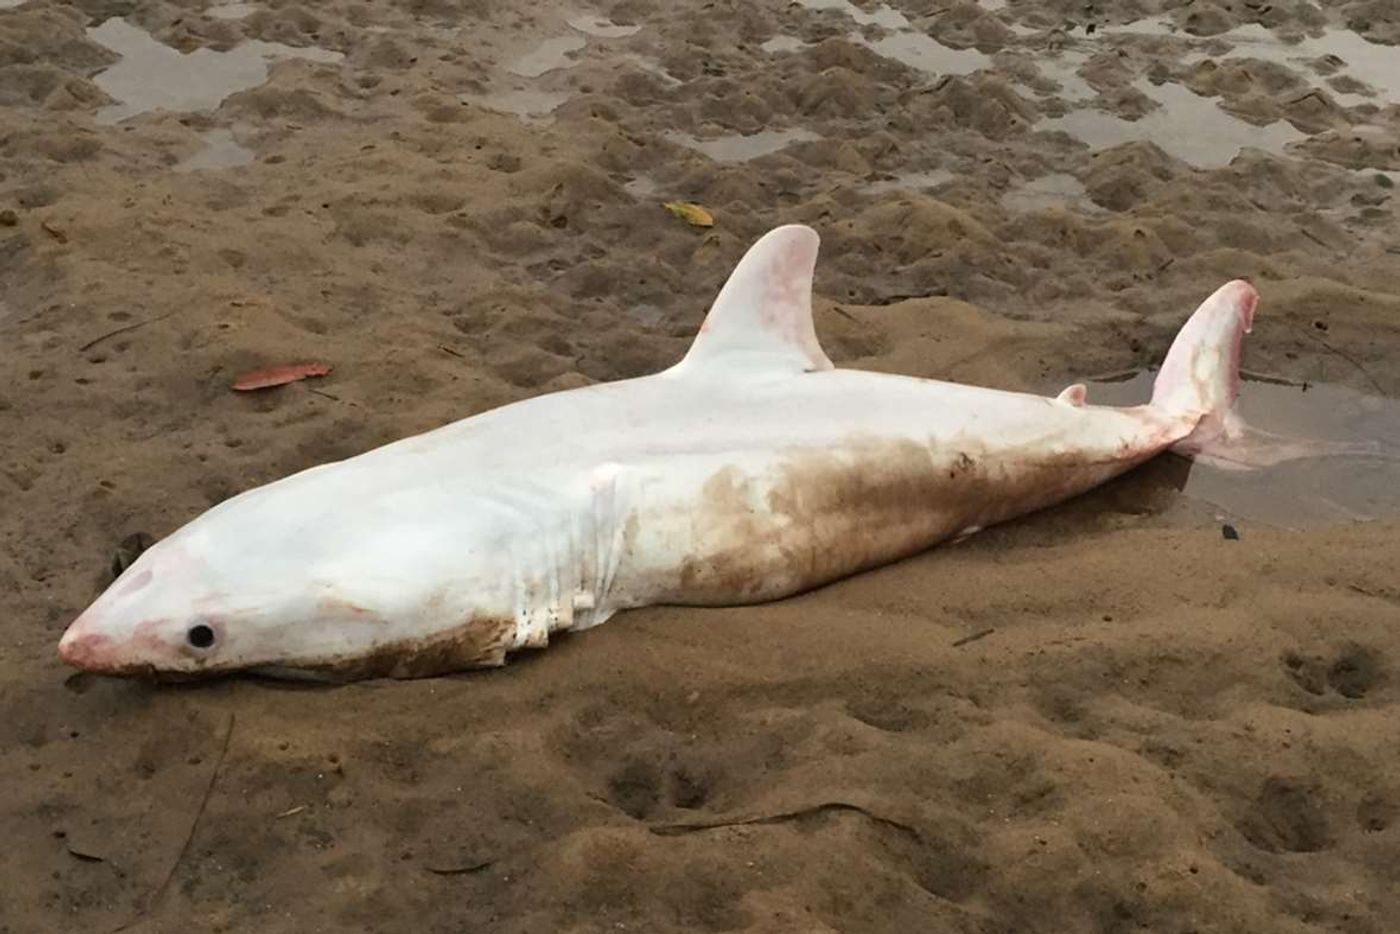 This shark pup lacks skin pigmentation and washed up on an Australian beach.